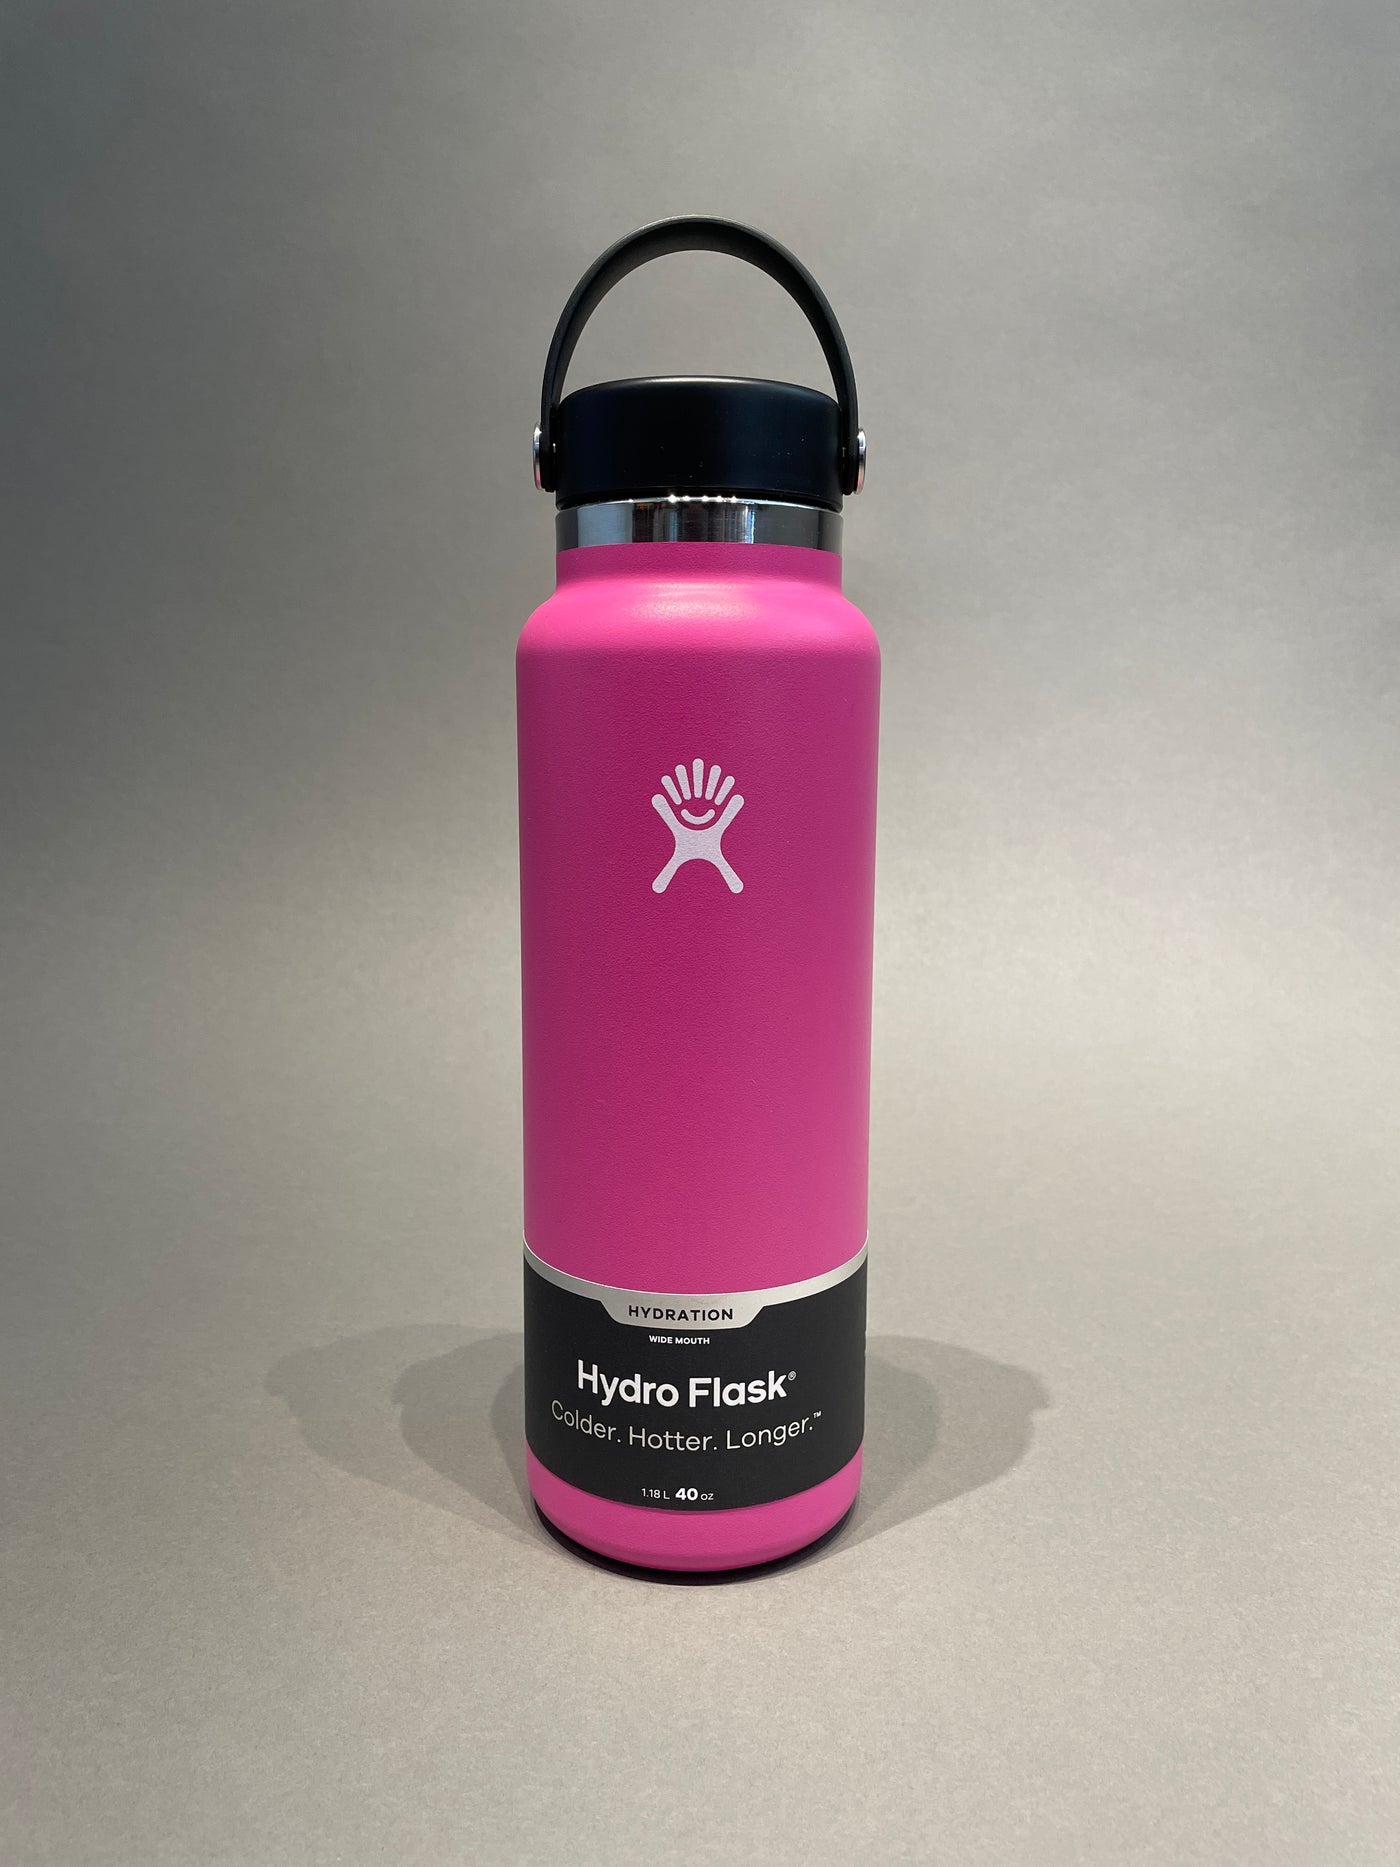 Hydro Flask: Pink is everything